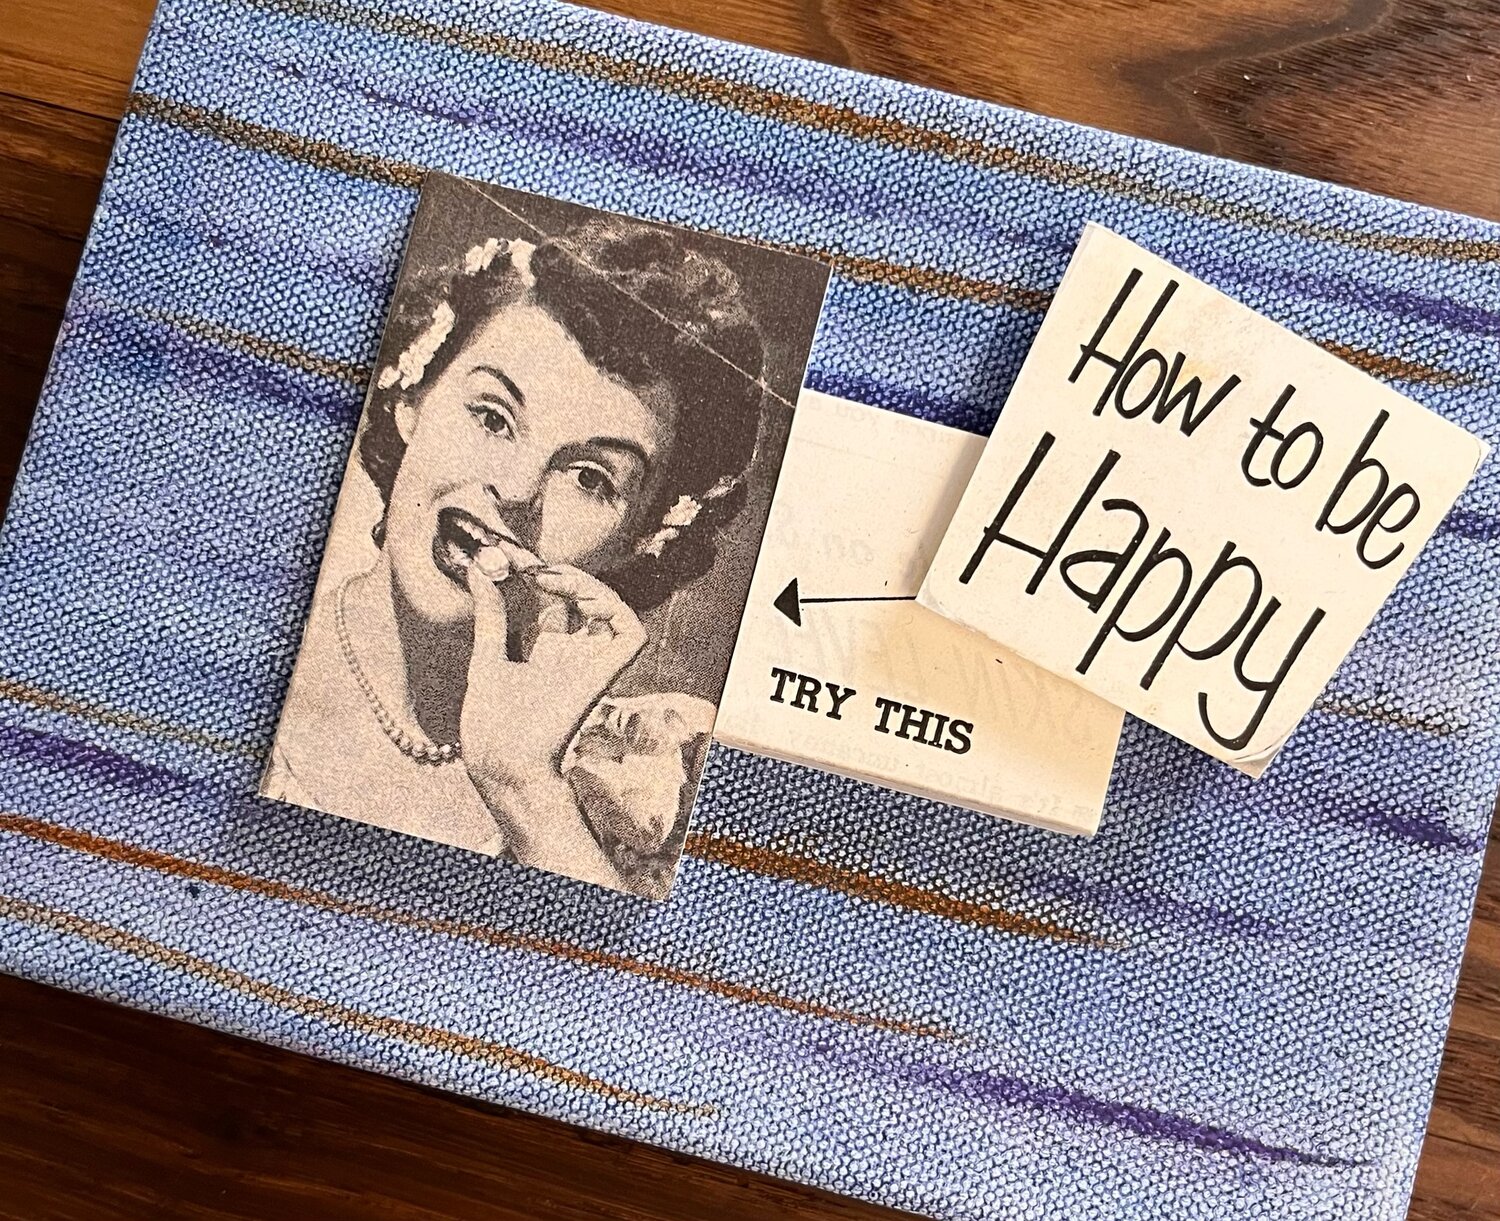 Barbara Winfield's "How to be Happy" collage exemplifies the generation of '60s moms (like mine) using the anti-anxiety drug Valium (popularly called "Mother's Little Helper") as a coping mechanism...